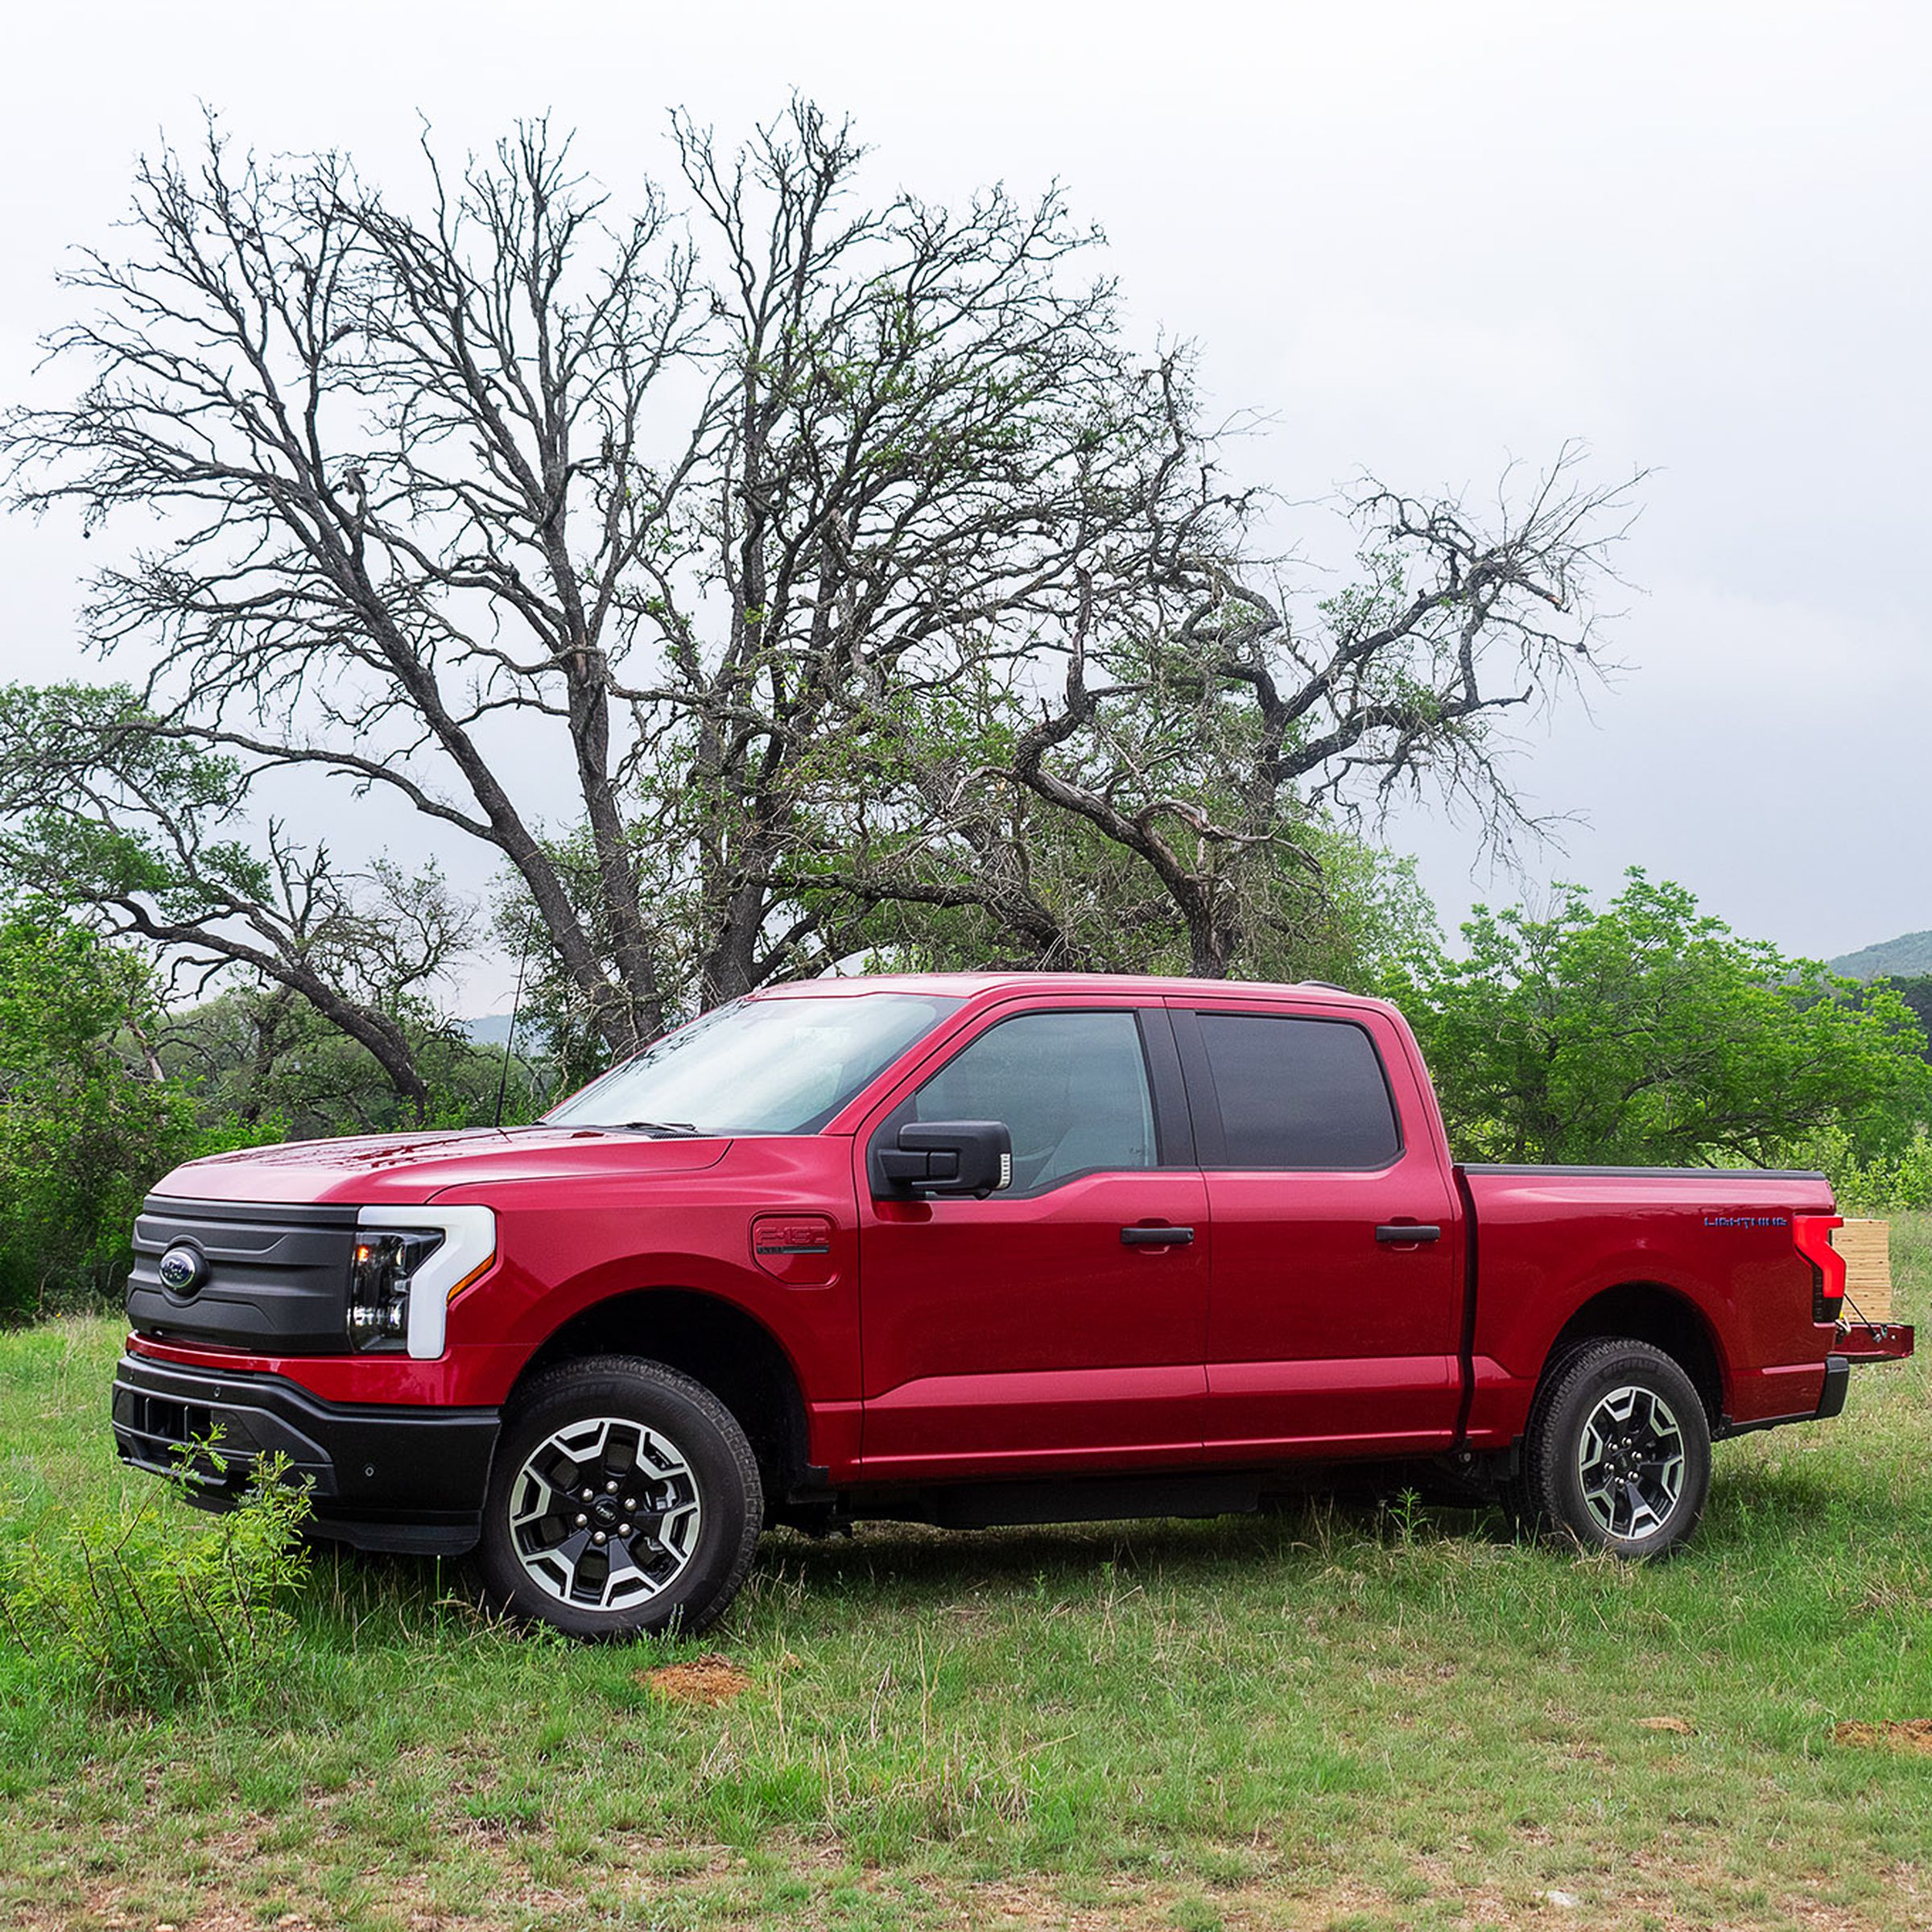 Ford F-150 Lightning electric truck in a field